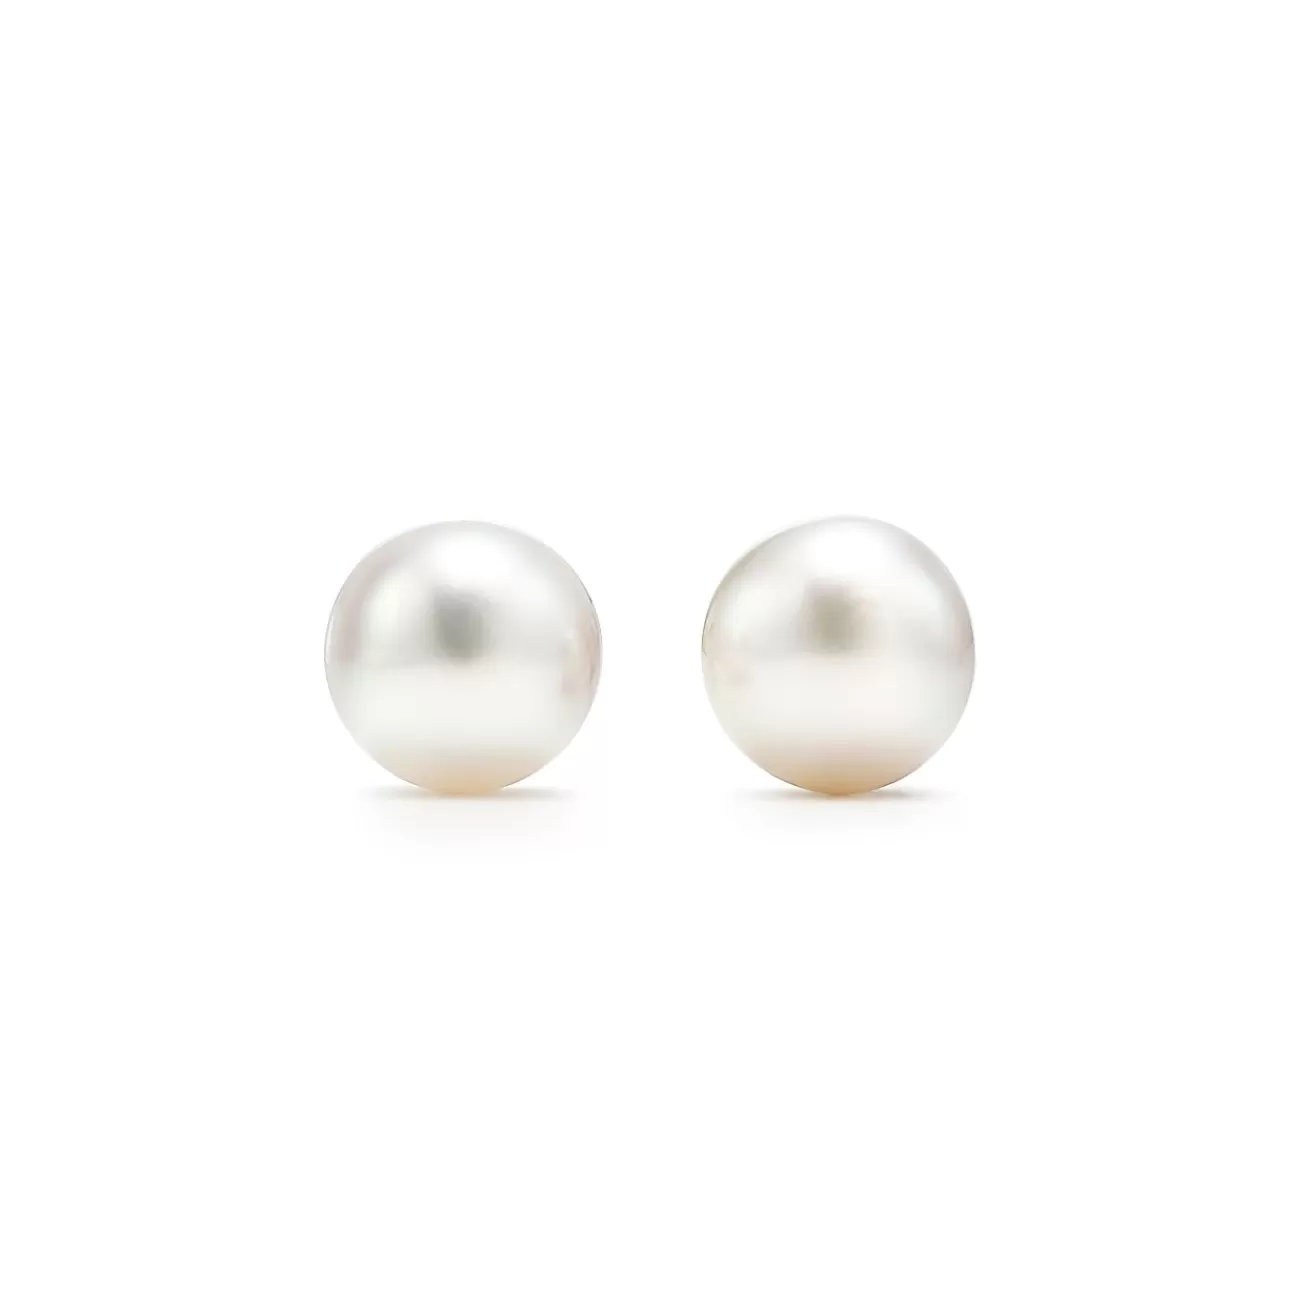 Tiffany & Co. Tiffany Signature® Pearls earrings of Akoya cultured pearls in 18k white gold. | ^ Earrings | Gifts for Her